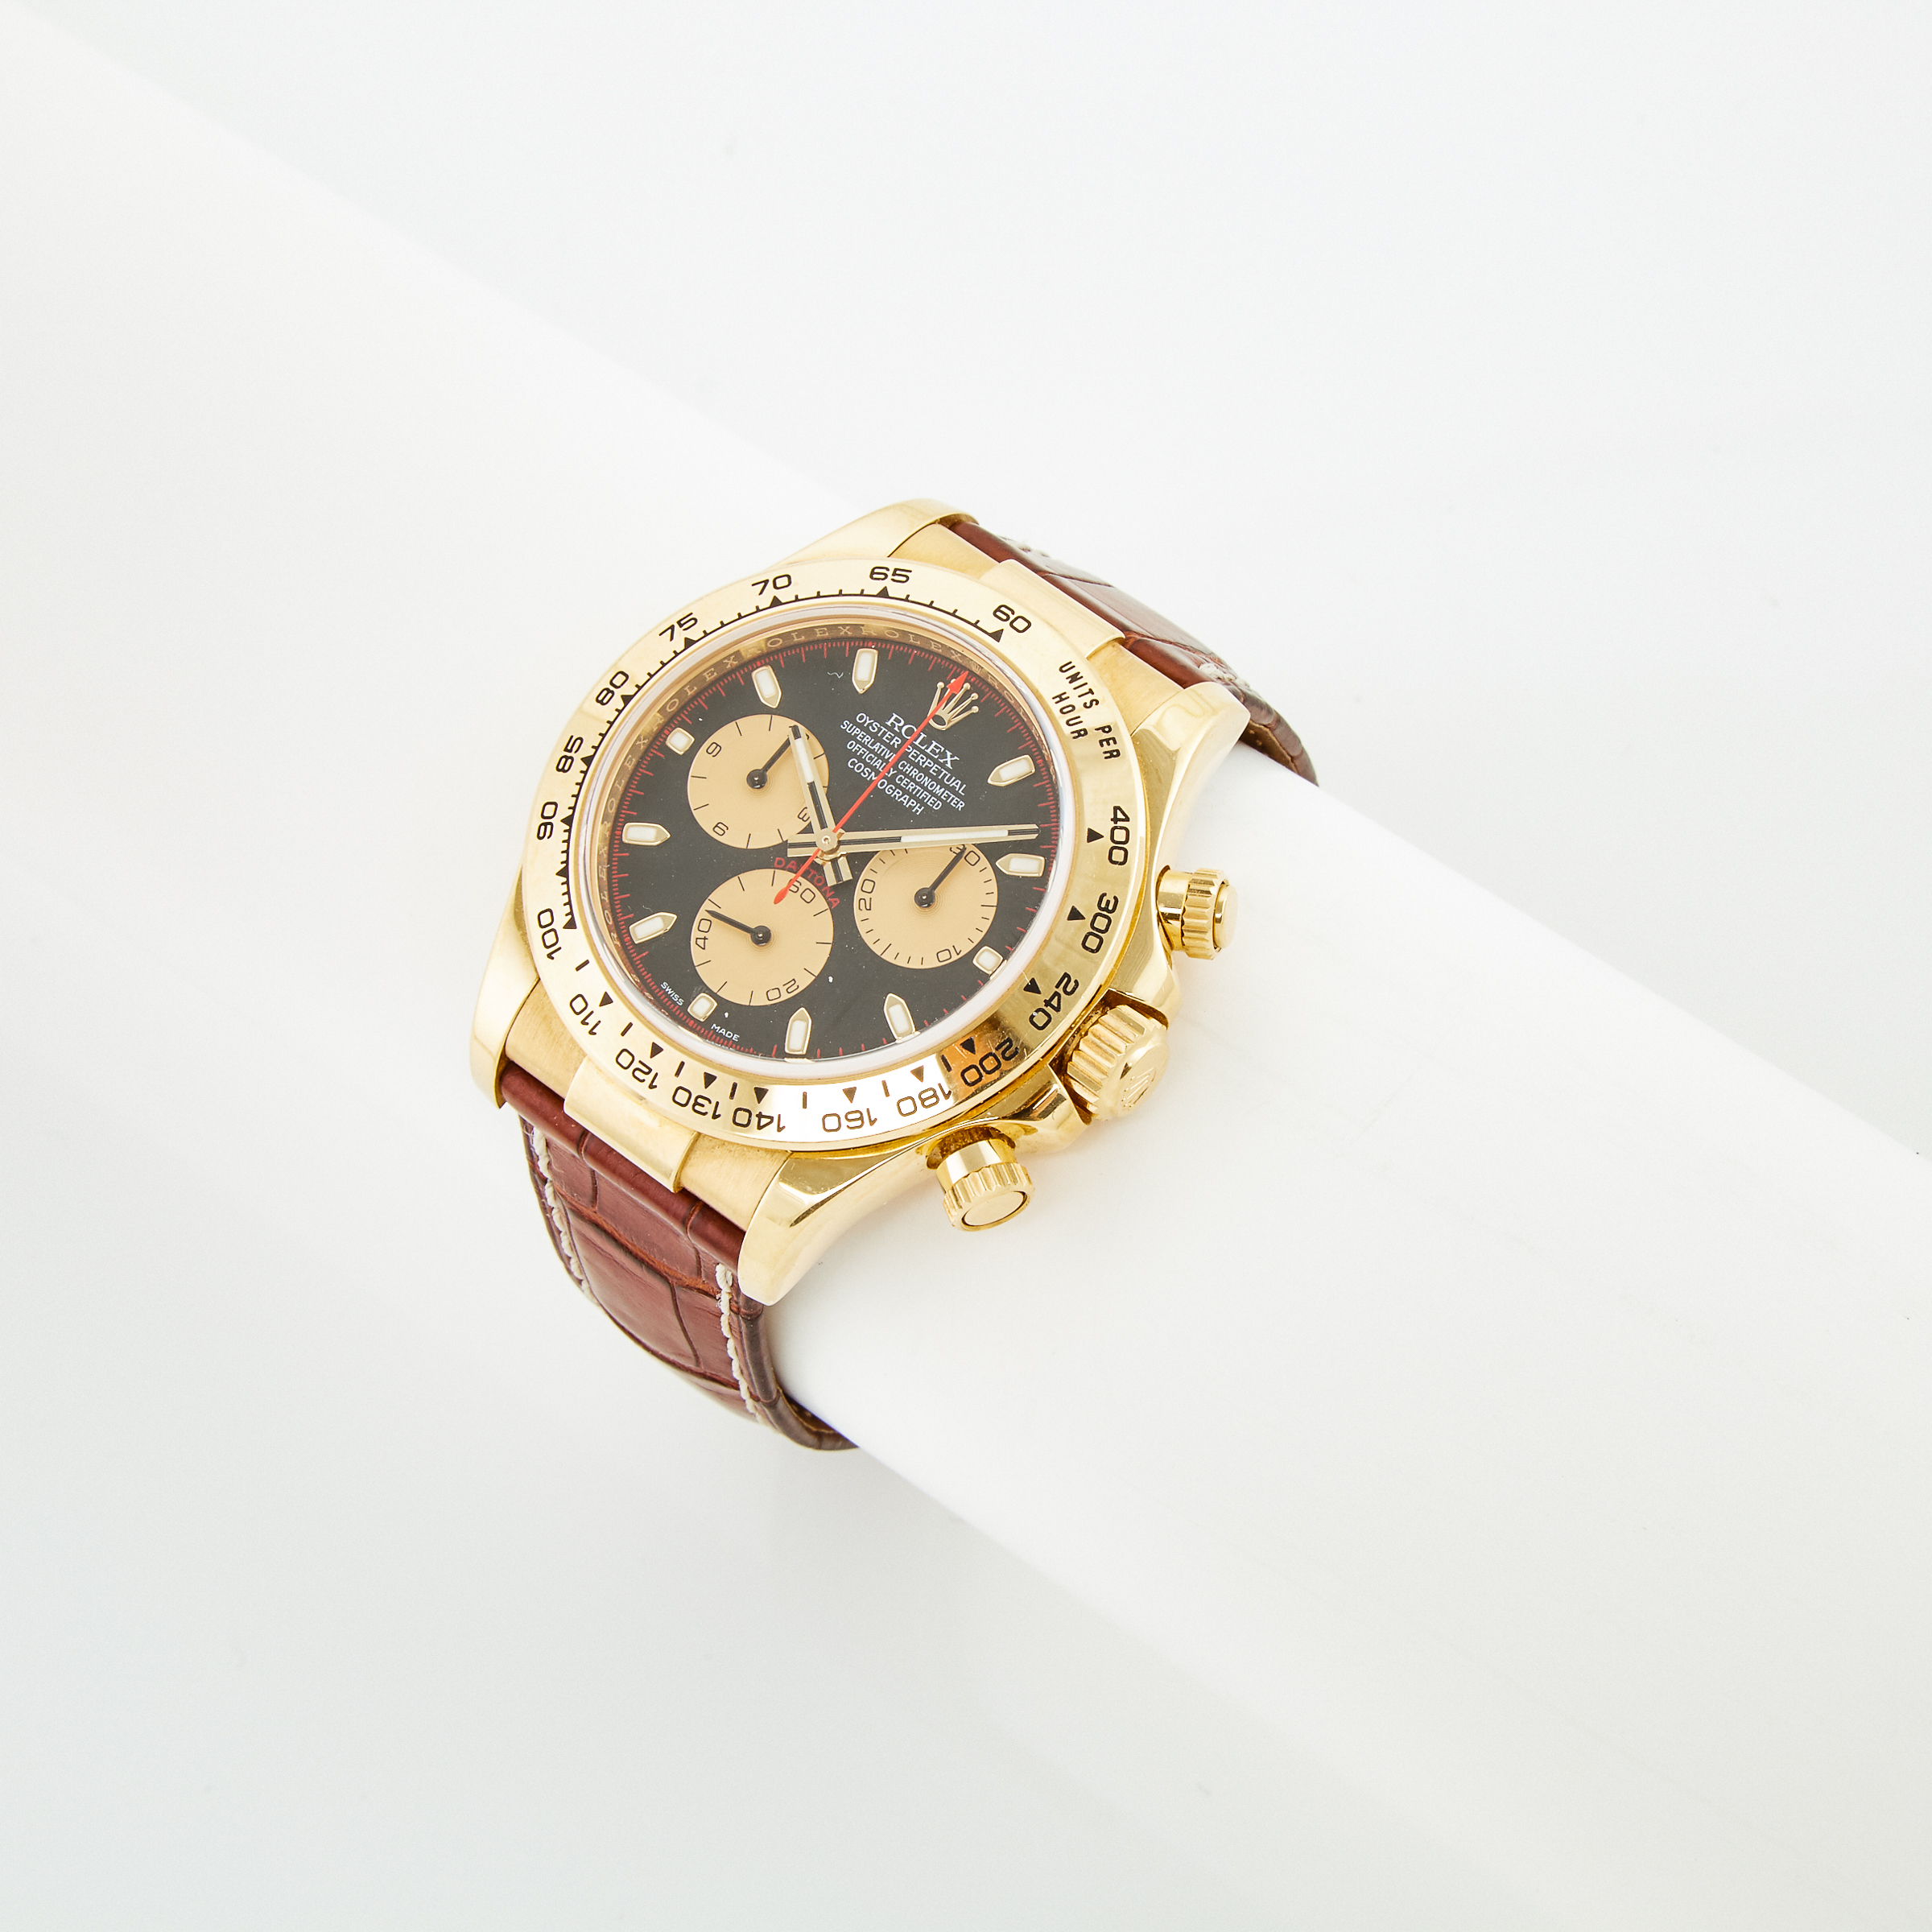 Rolex Oyster Perpetual Cosmograph Daytona Wristwatch, With Date And Chronograph